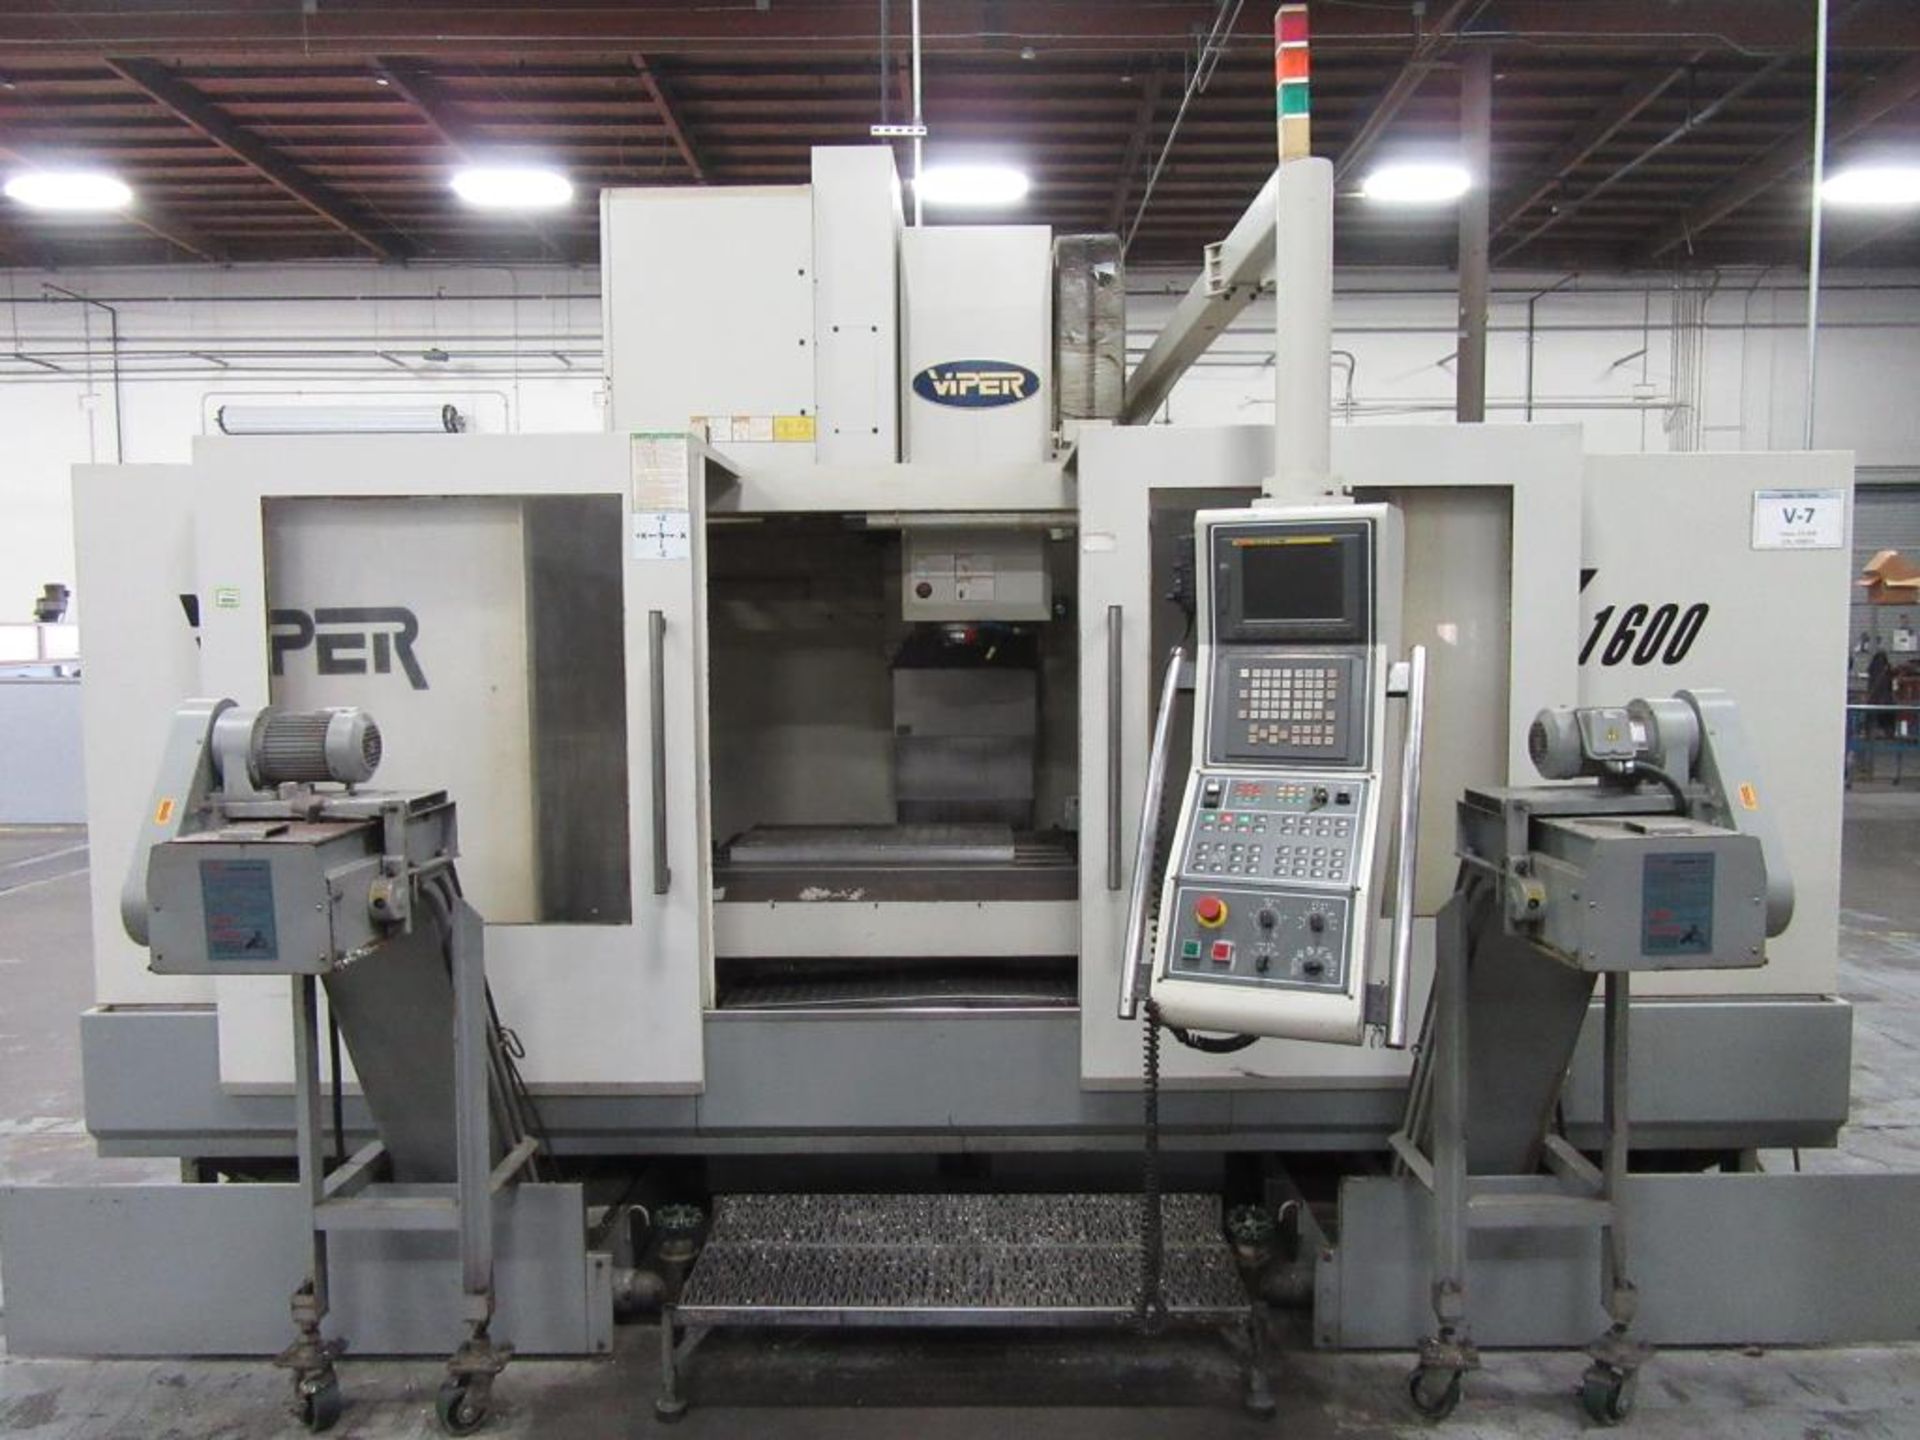 Mighty Viper VMC-1600A. 2006 - CNC Vertical Machining Center with Fanuc 21i-MB 3-Axis Control Panel, - Image 4 of 22